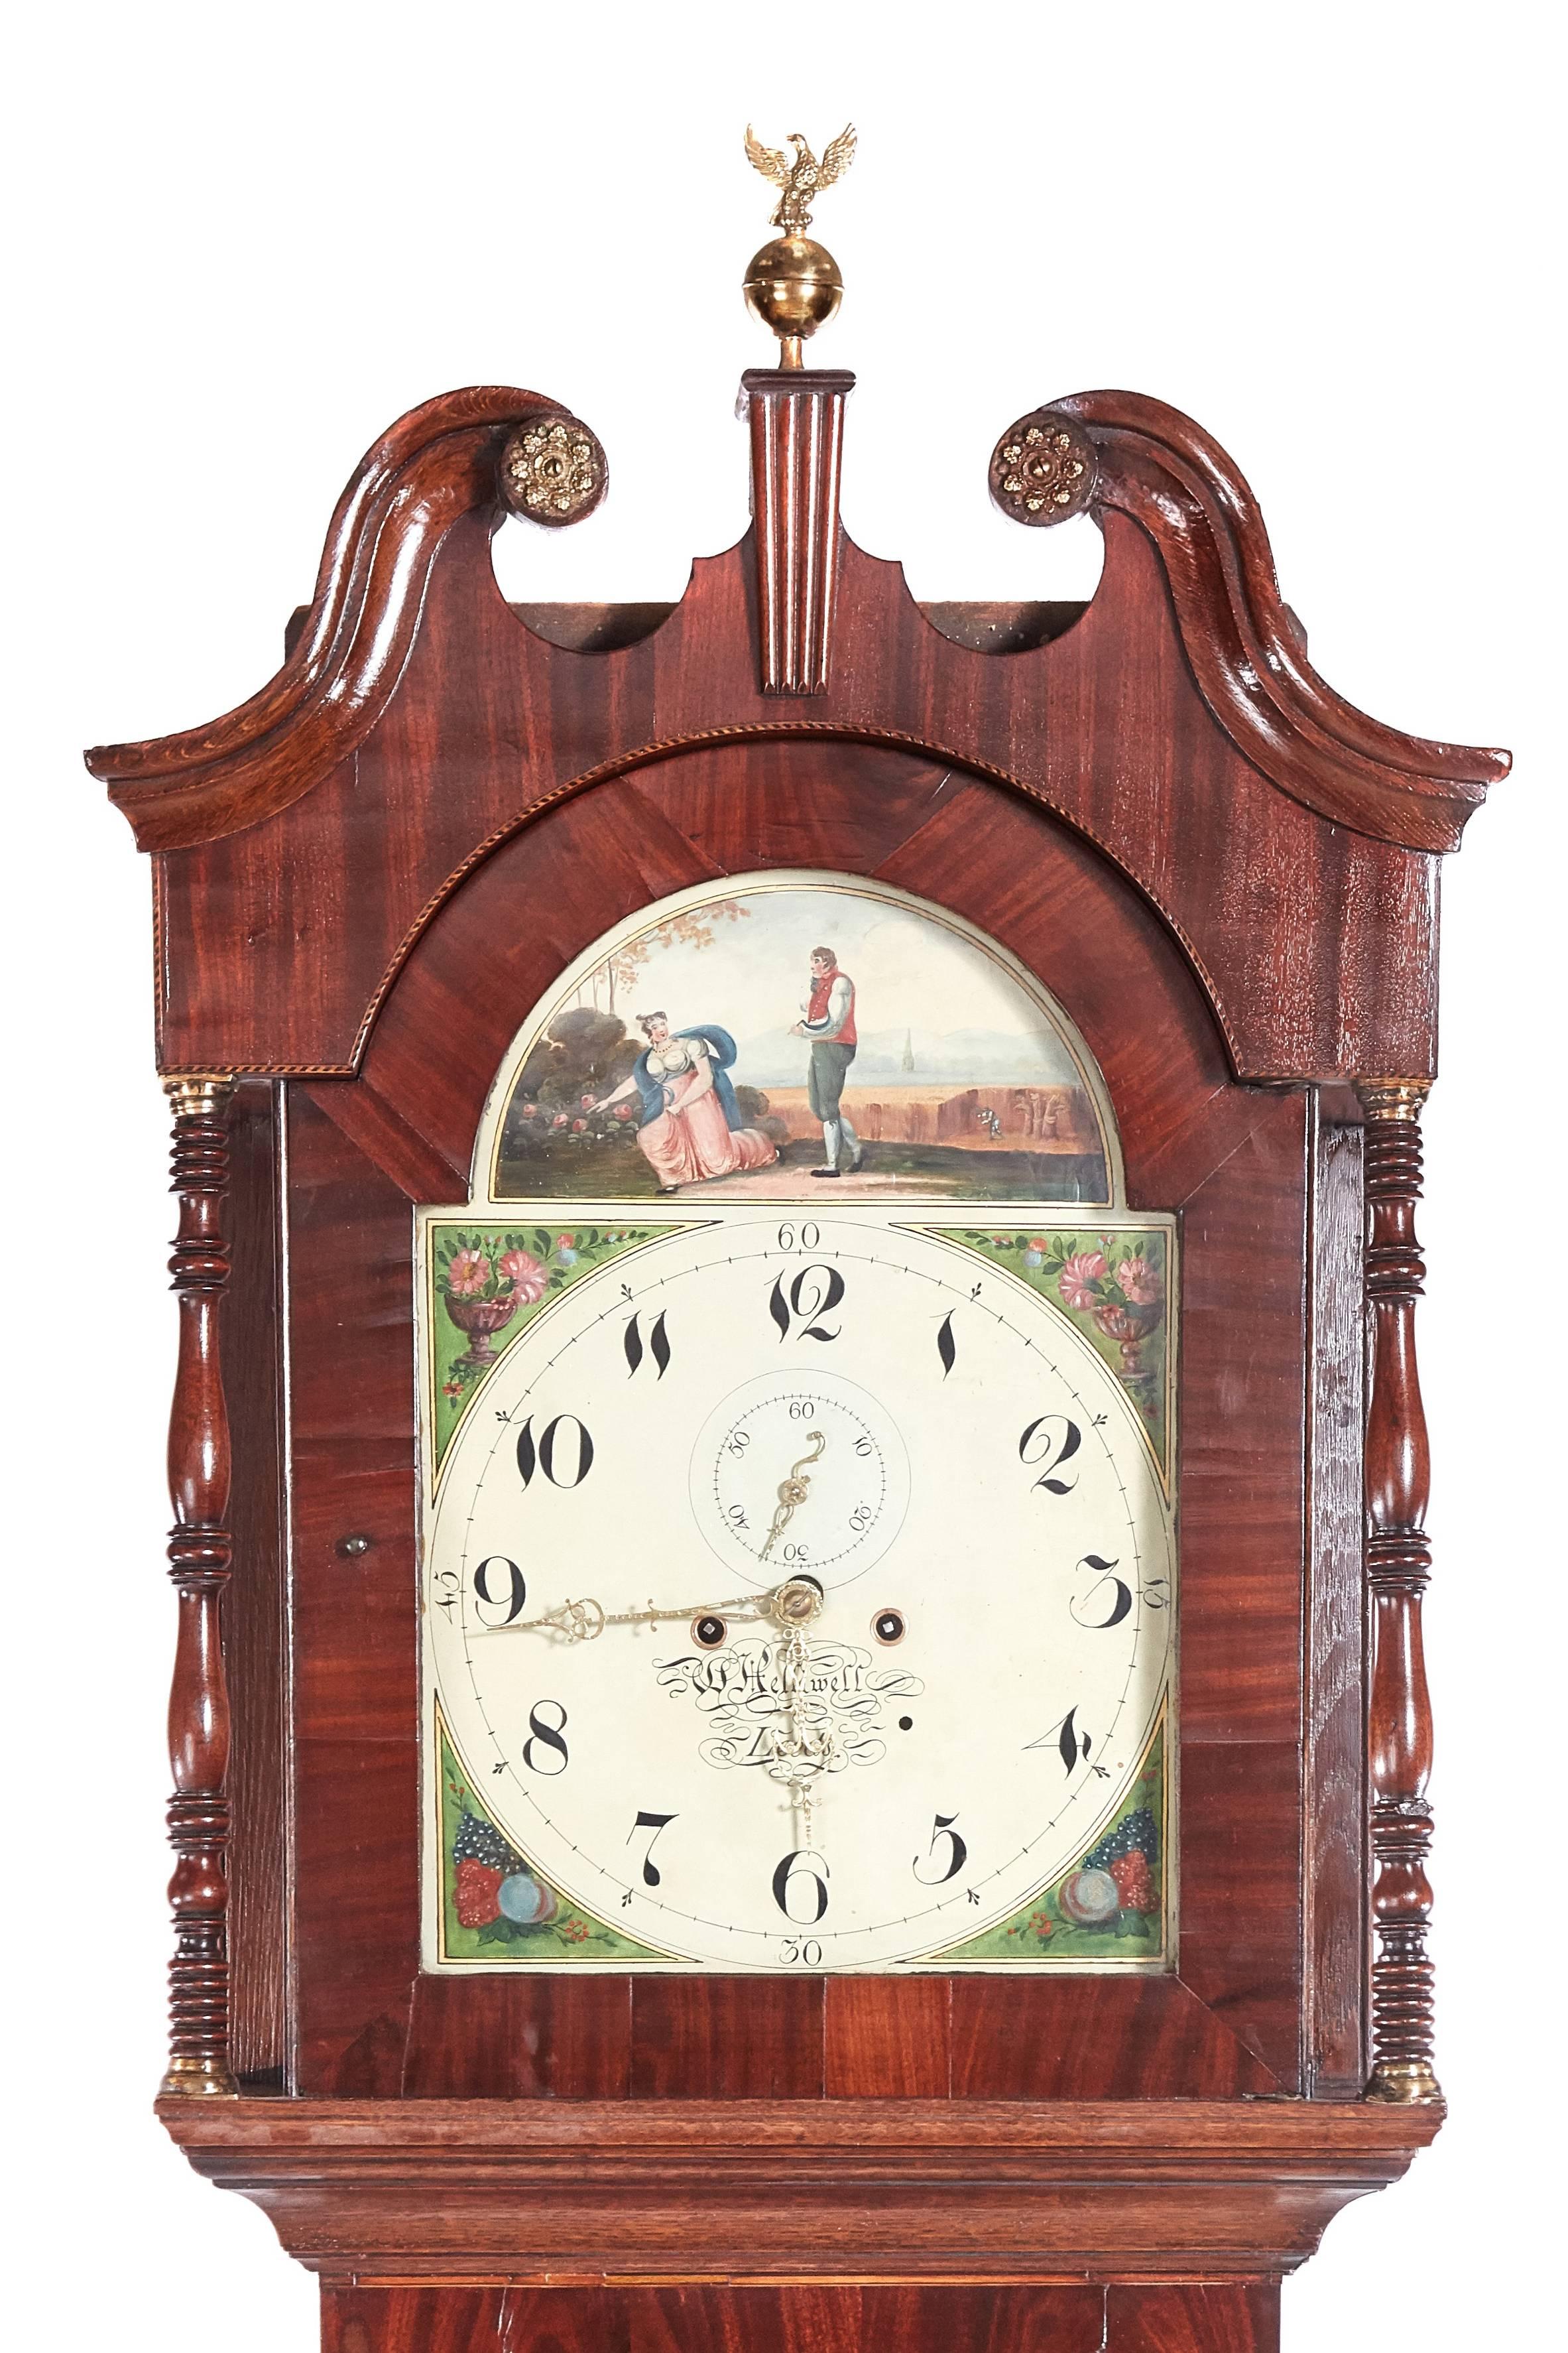 Antique mahogany and oak 8 day longcase clock, W Helliwell Leeds, with a swan-neck pediment, brass finial, turned columns to the hood, lovely mahogany and oak case with satinwood stringing, standing on lovely shaped bracket feet, lovely decorative